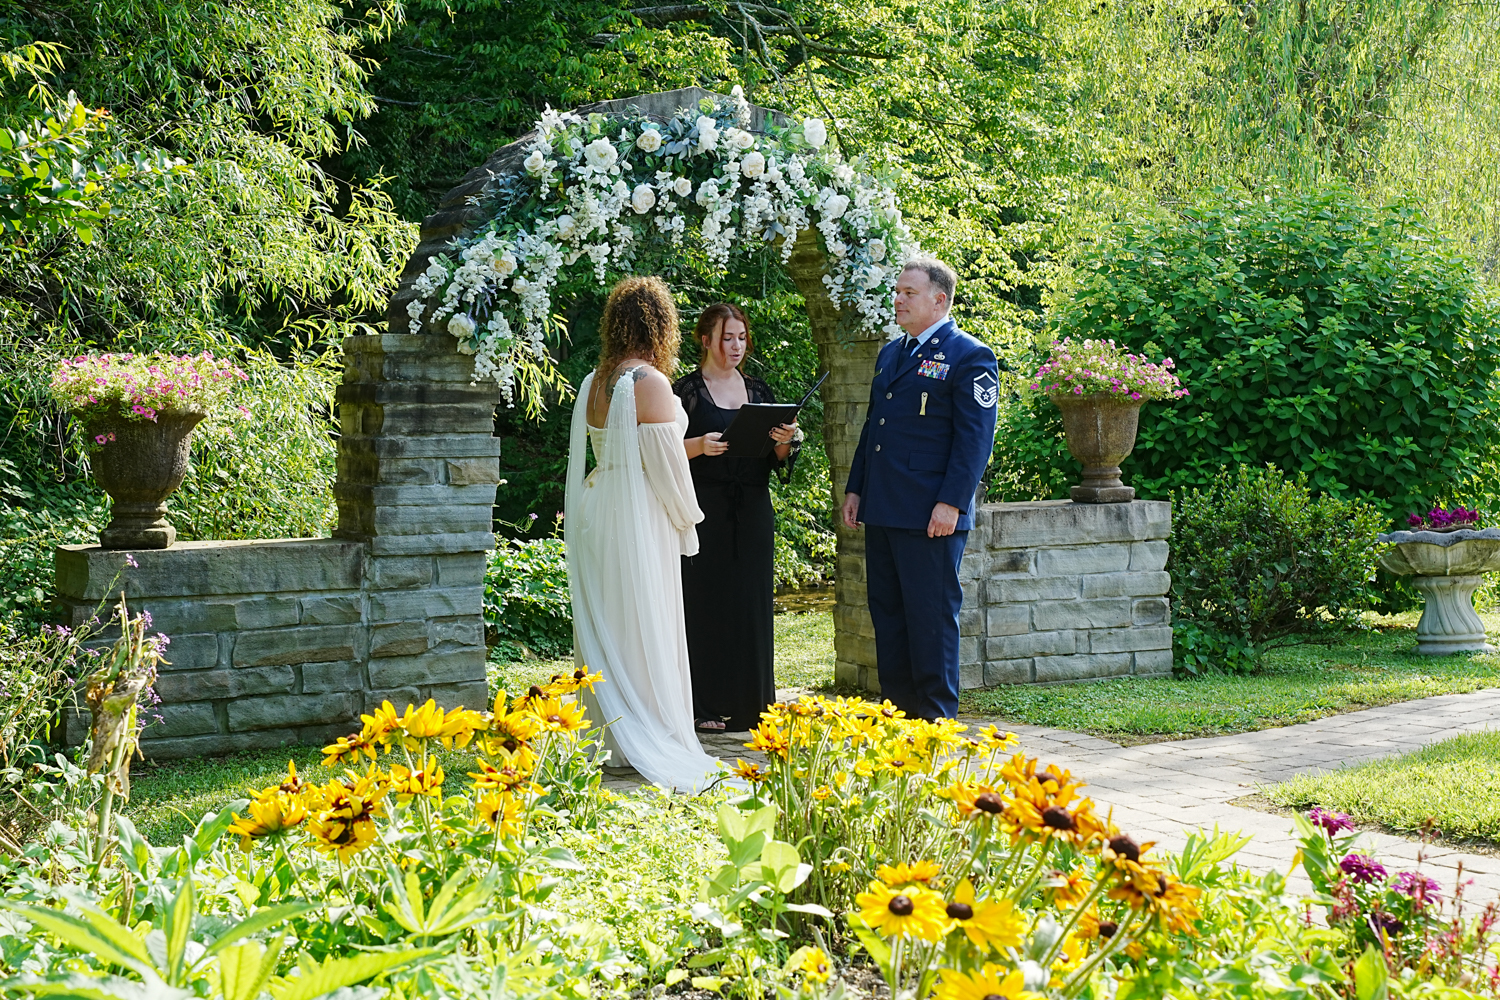 Abi officiating a wedding at the stone arch ceremony site at Honeysuckle Hills in Pigeon Forge TN